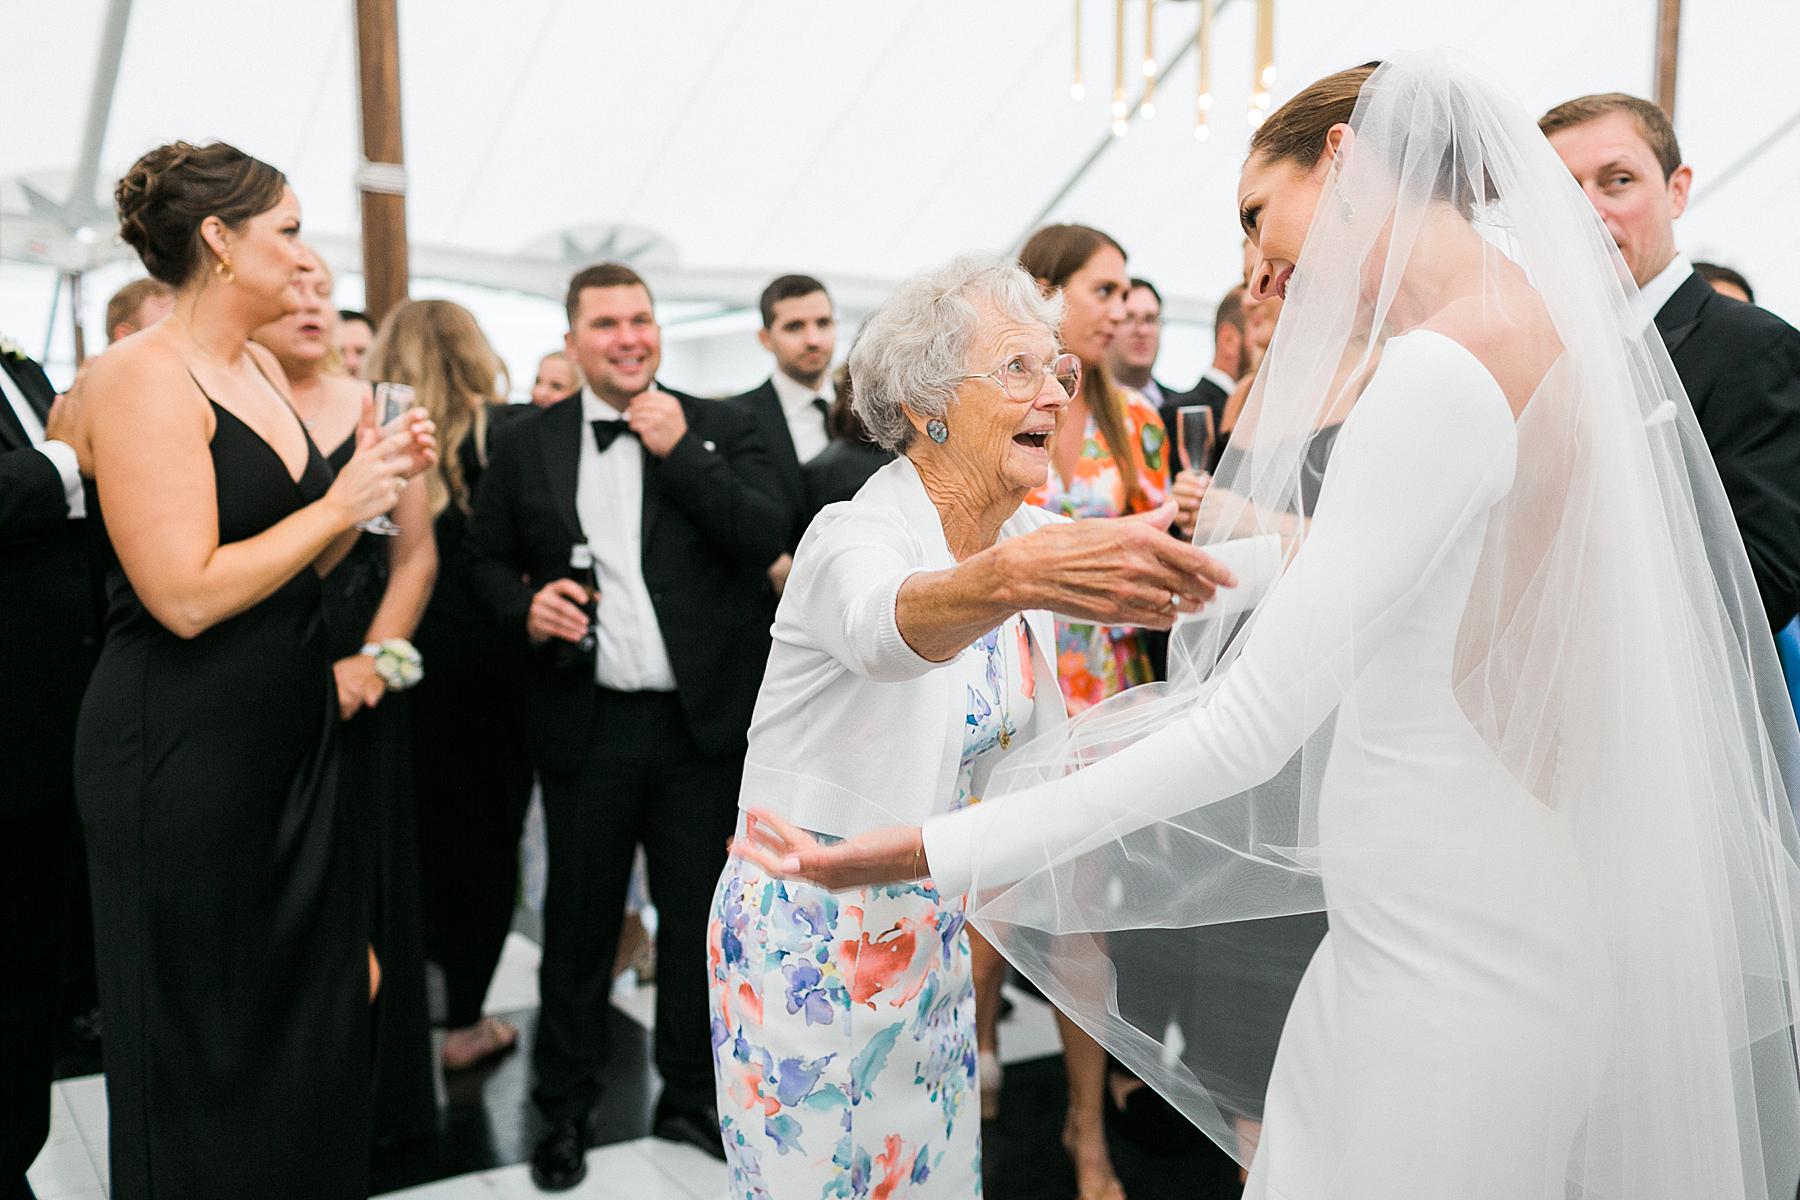 newlyweds dance with grandparents on checkerboard dance floor under a sailcloth tent wedding reception, at horseshoe bay beach club in door county